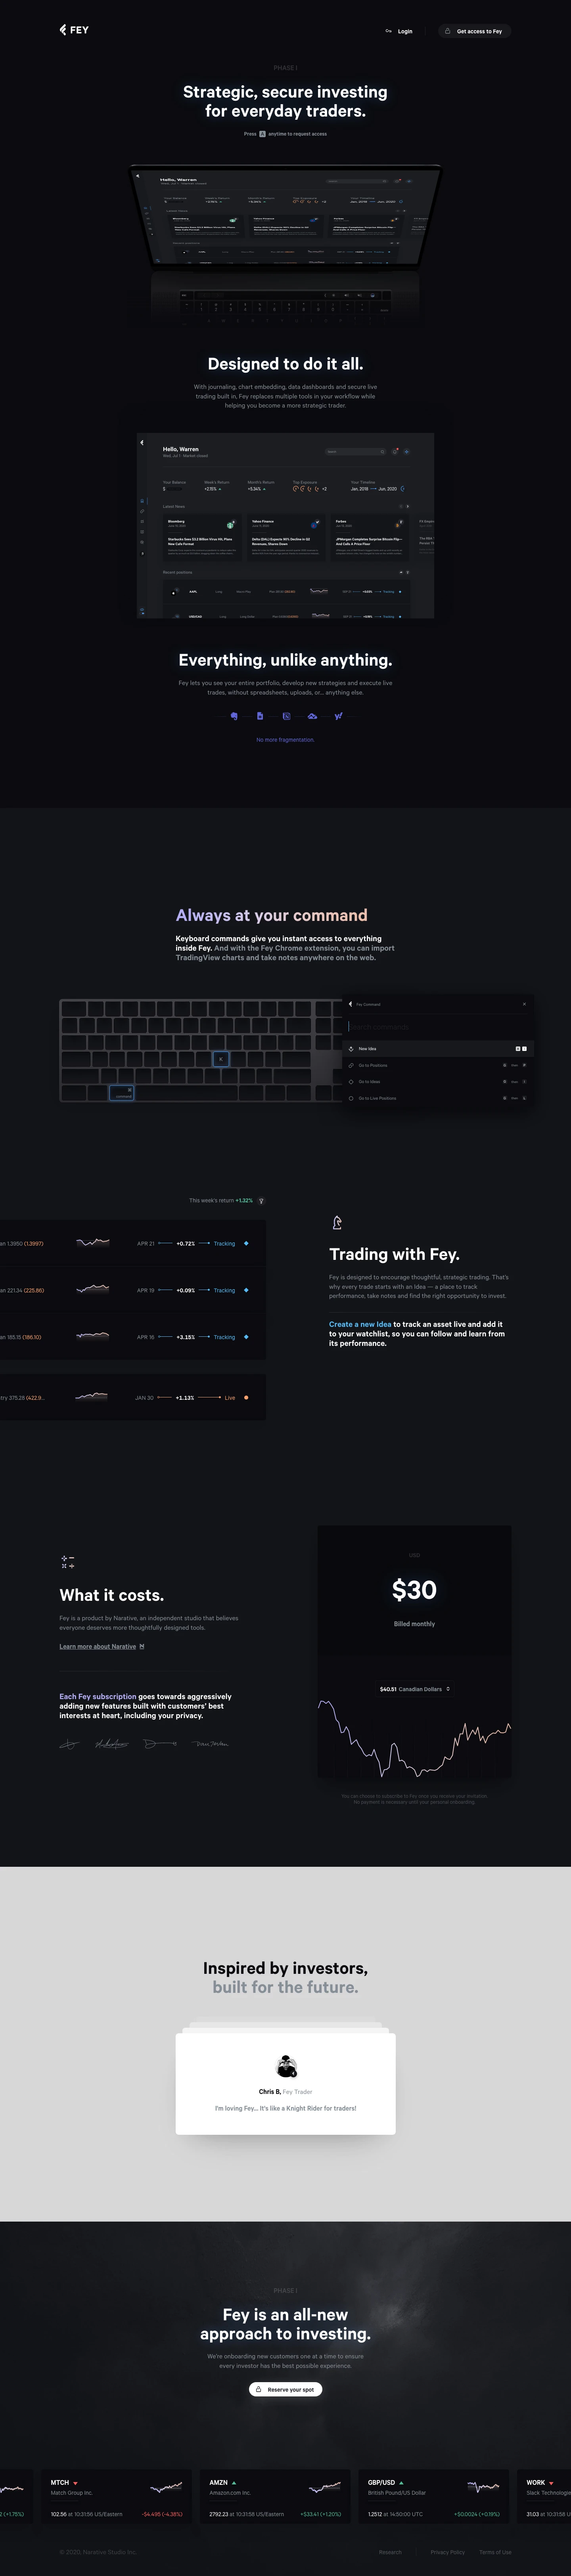 Fey Landing Page Example: Fey provides journaling, chart embedding, data dashboards and secure live trading all in one platform to help you become a more strategic trader.